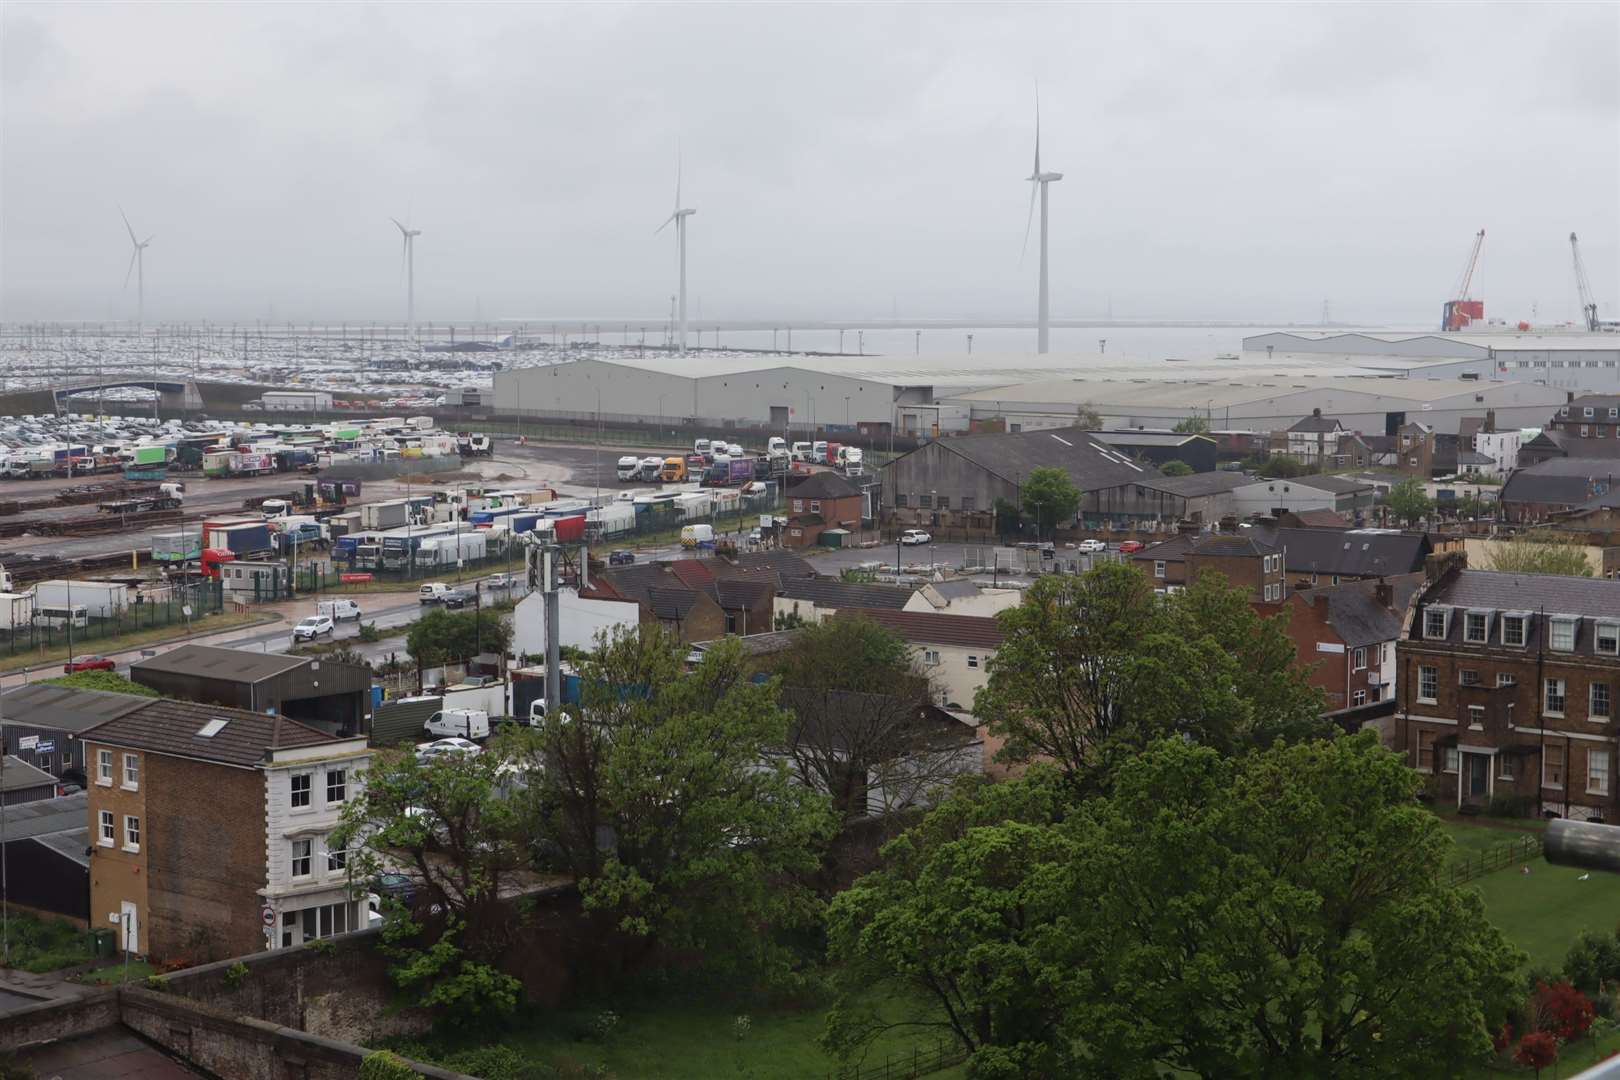 Sheerness Docks from the top of the Dockyard Church, Blue Town